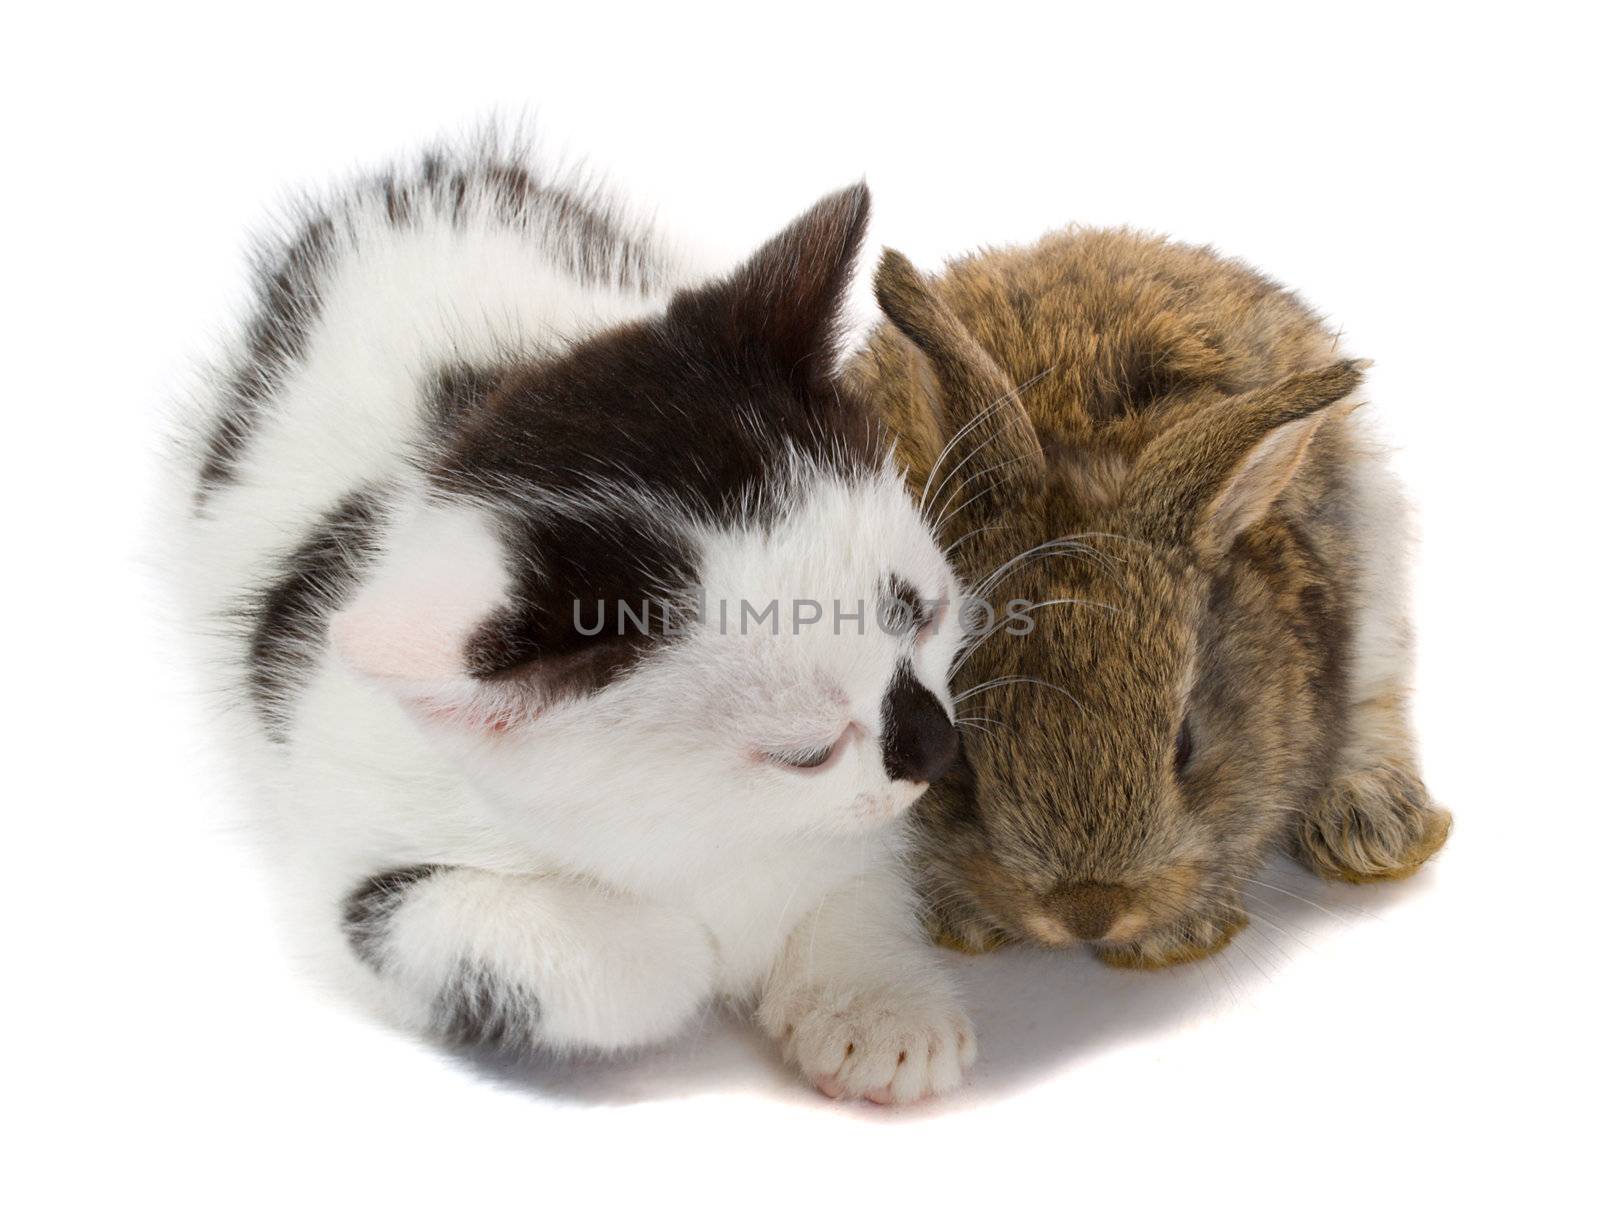 close-up kitten and baby rabbit, isolated on white